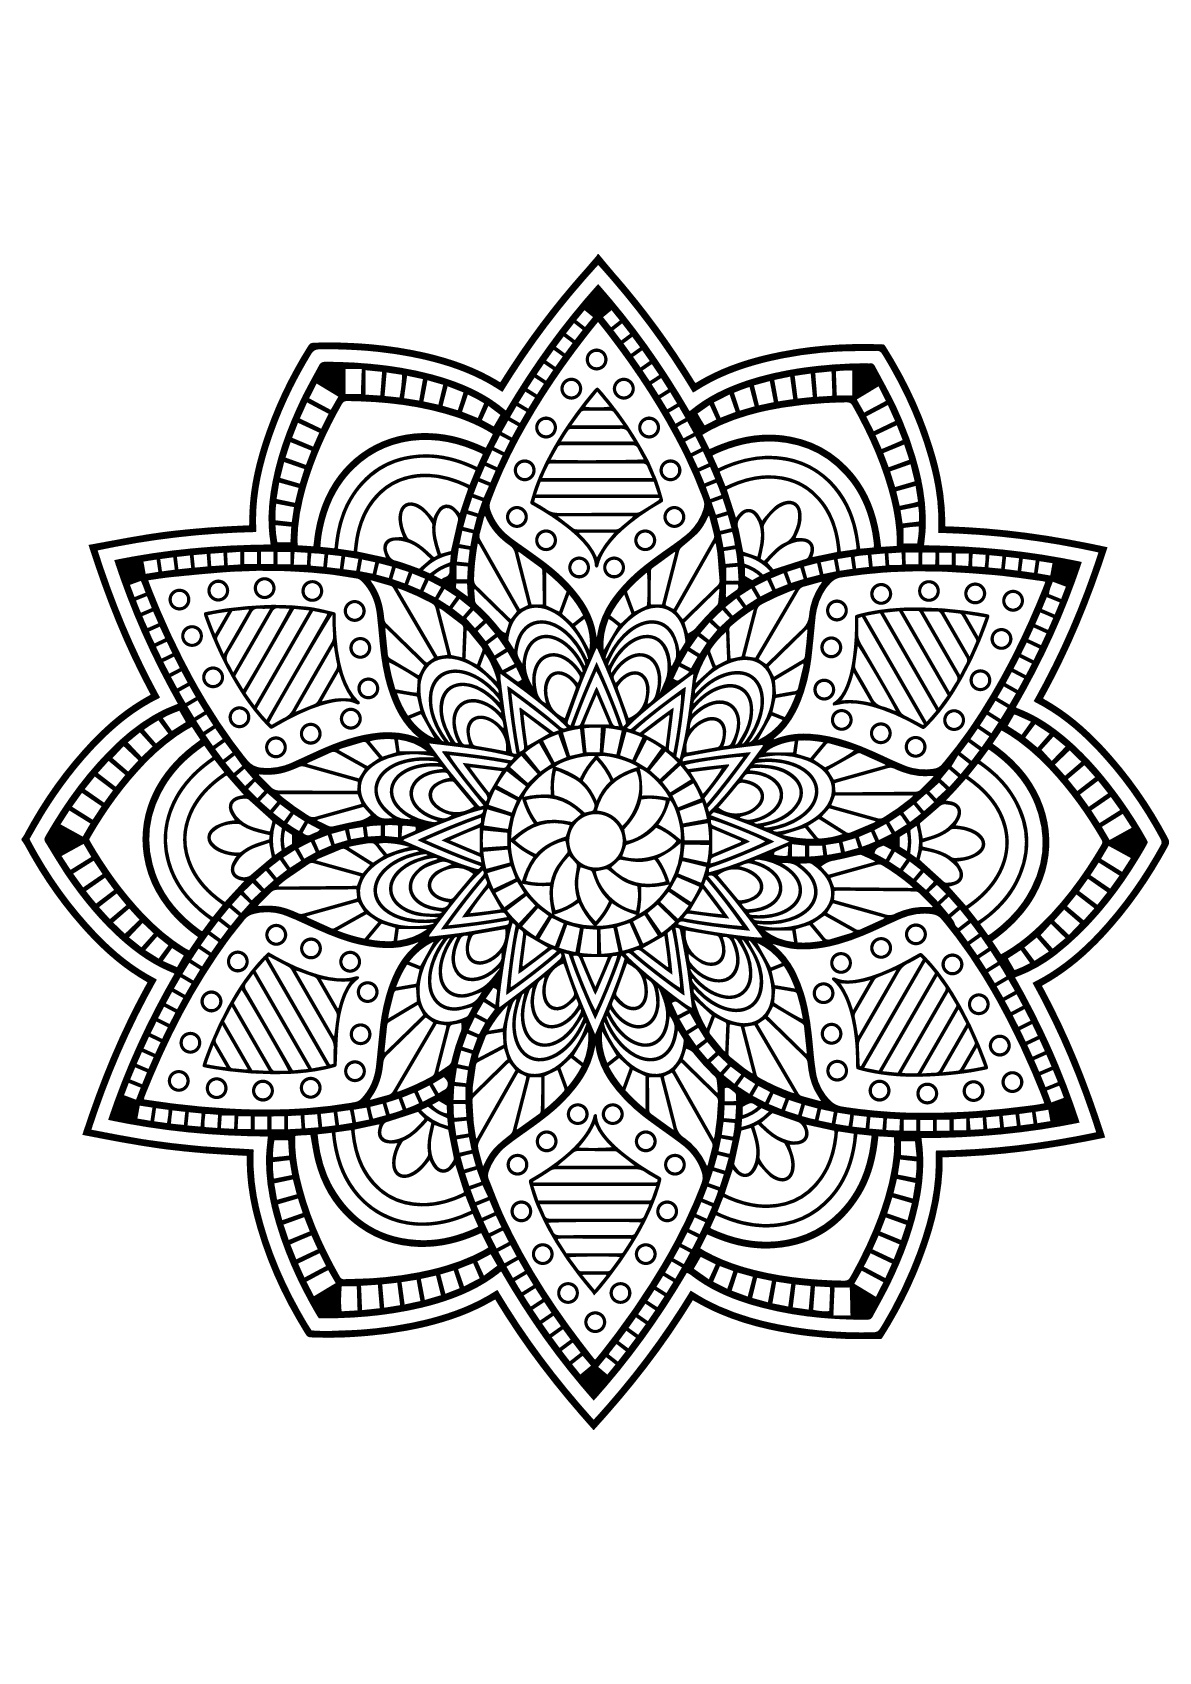 Download Mandala from free coloring books for adults 24 - Mandalas Adult Coloring Pages